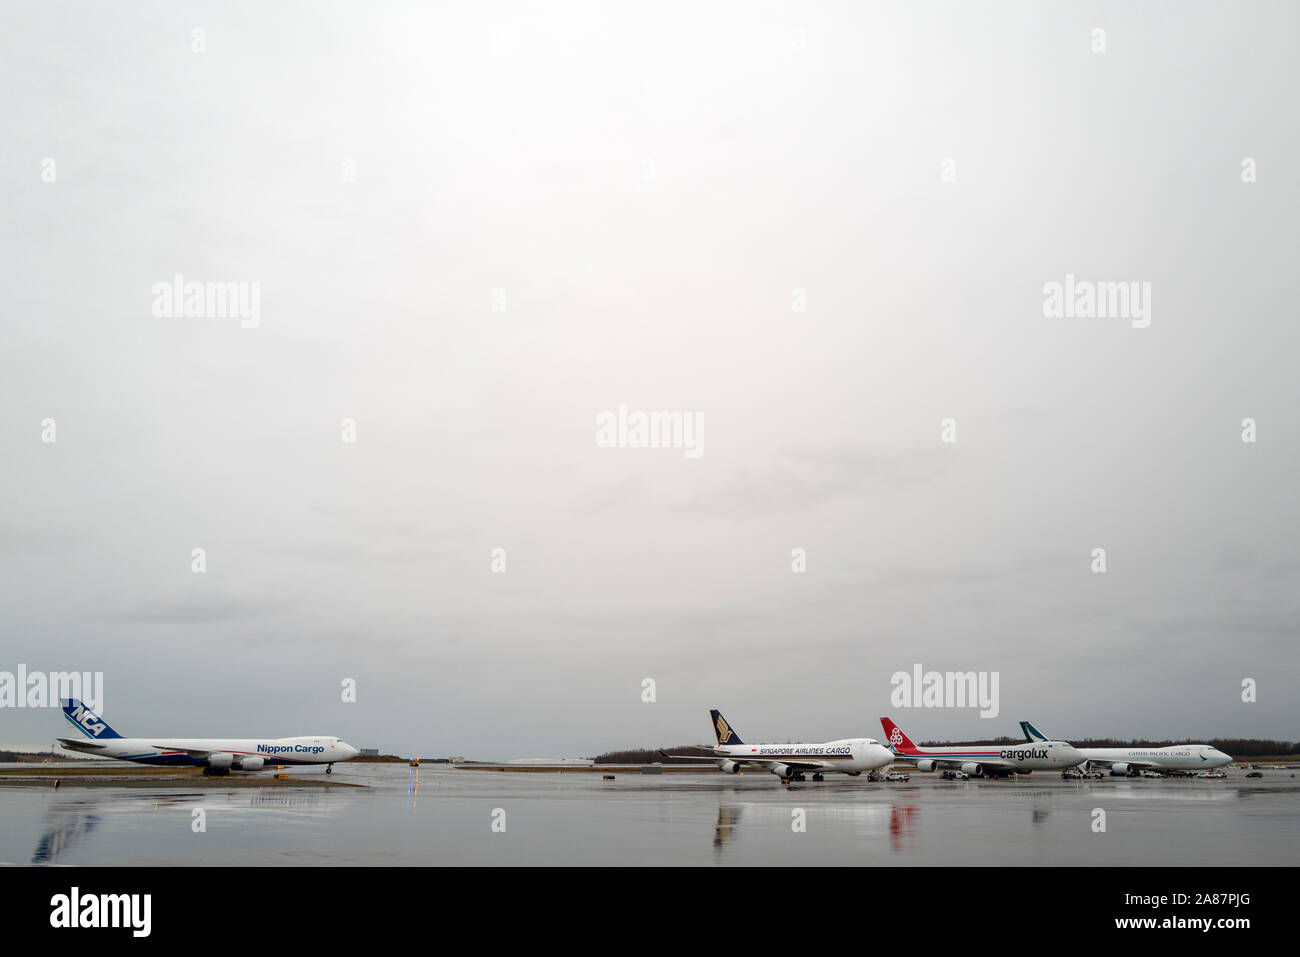 Ted Stevens International Airoprt Anchorage Alaska USA. Daily life at the airport, aircraft arriving and departing, crew change and refueling. Stock Photo